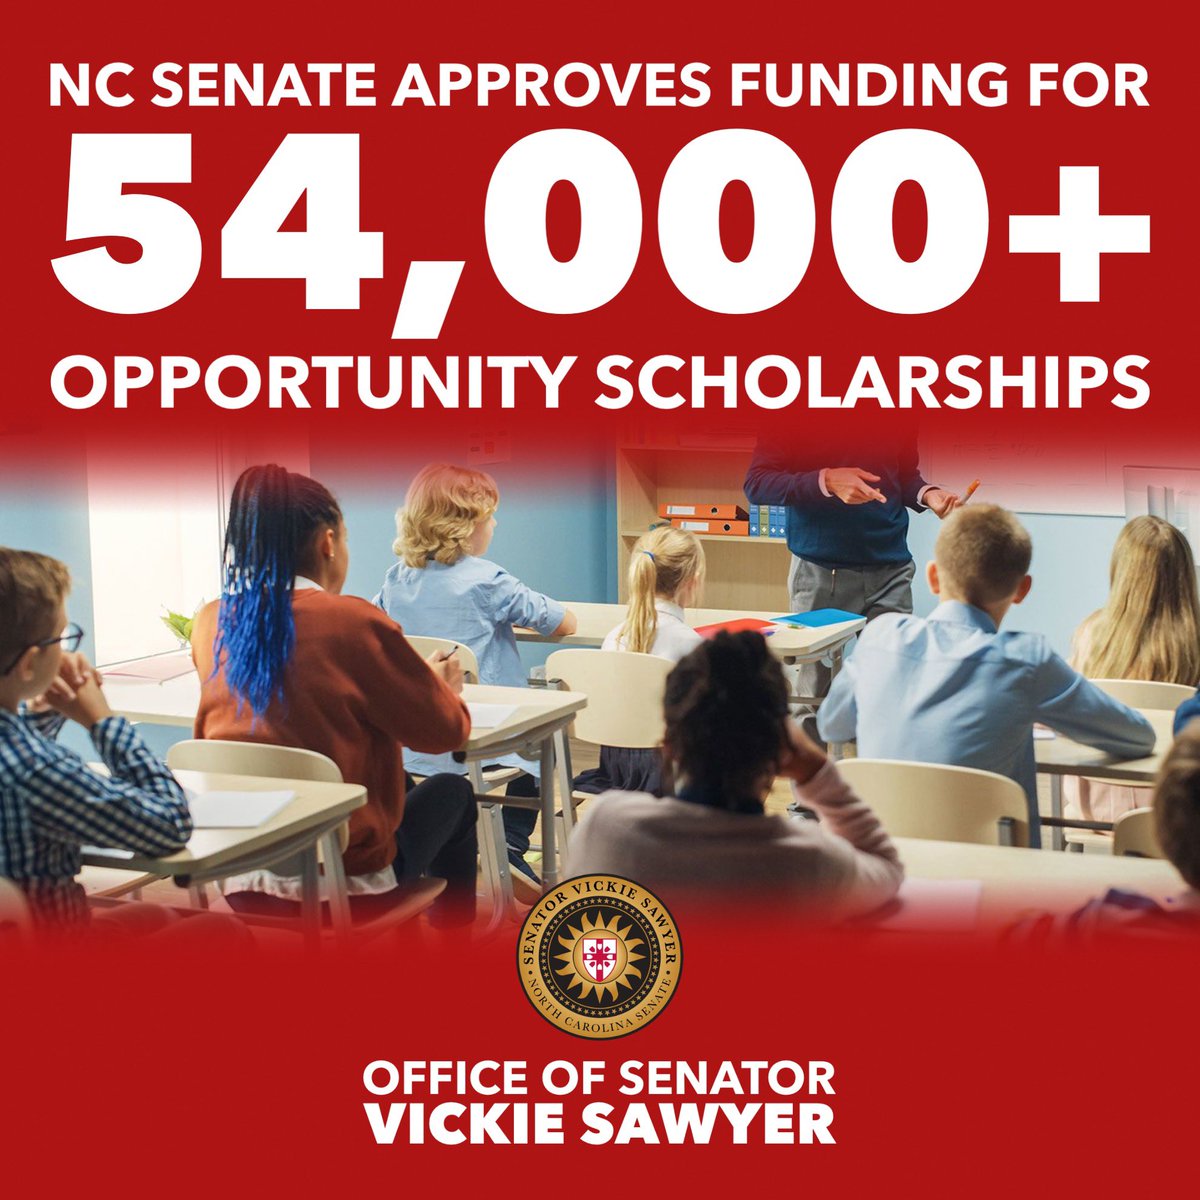 I'm thrilled to share that the #NCGA Senate has just passed HB 823, which clears the waitlists for school choice programs by funding over 54,000 Opportunity Scholarships! This bill is a game-changer, ensuring that every child in our great state can access the school that best